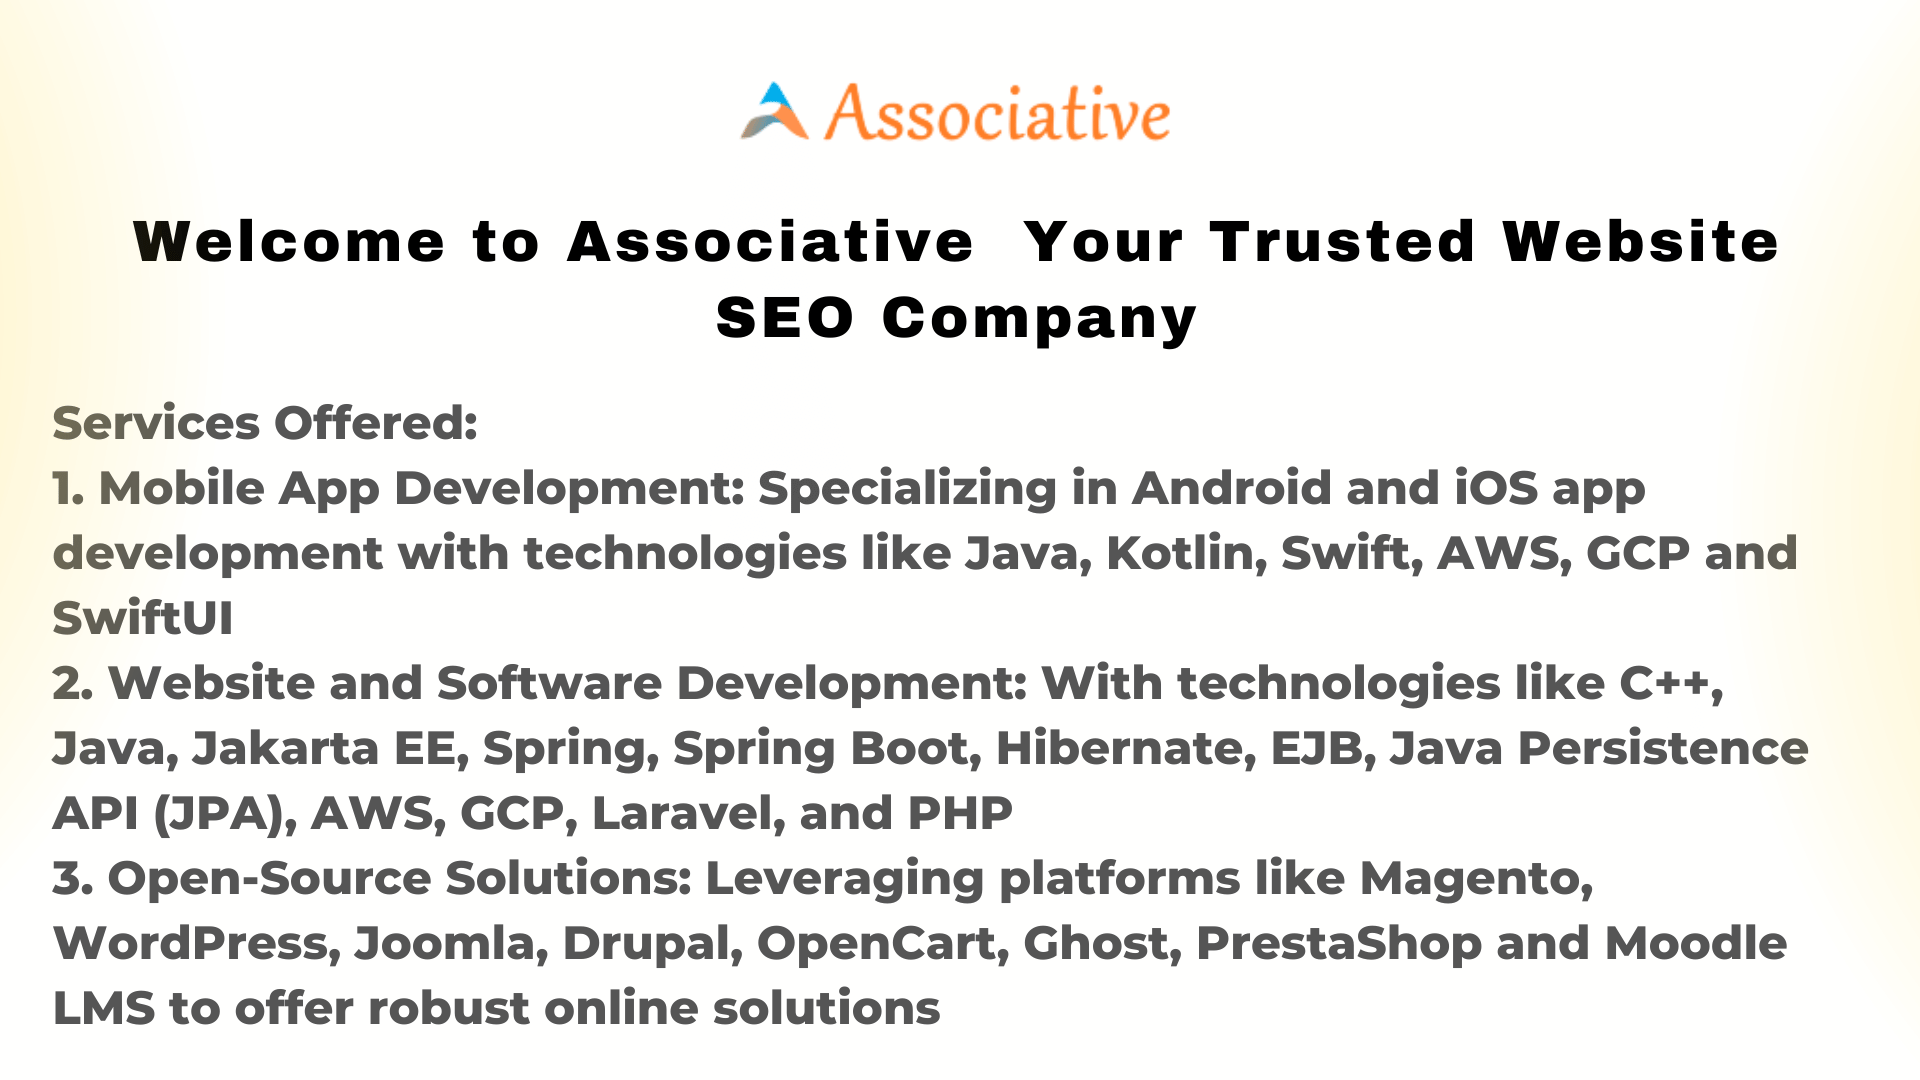 Welcome to Associative Your Trusted Website SEO Company